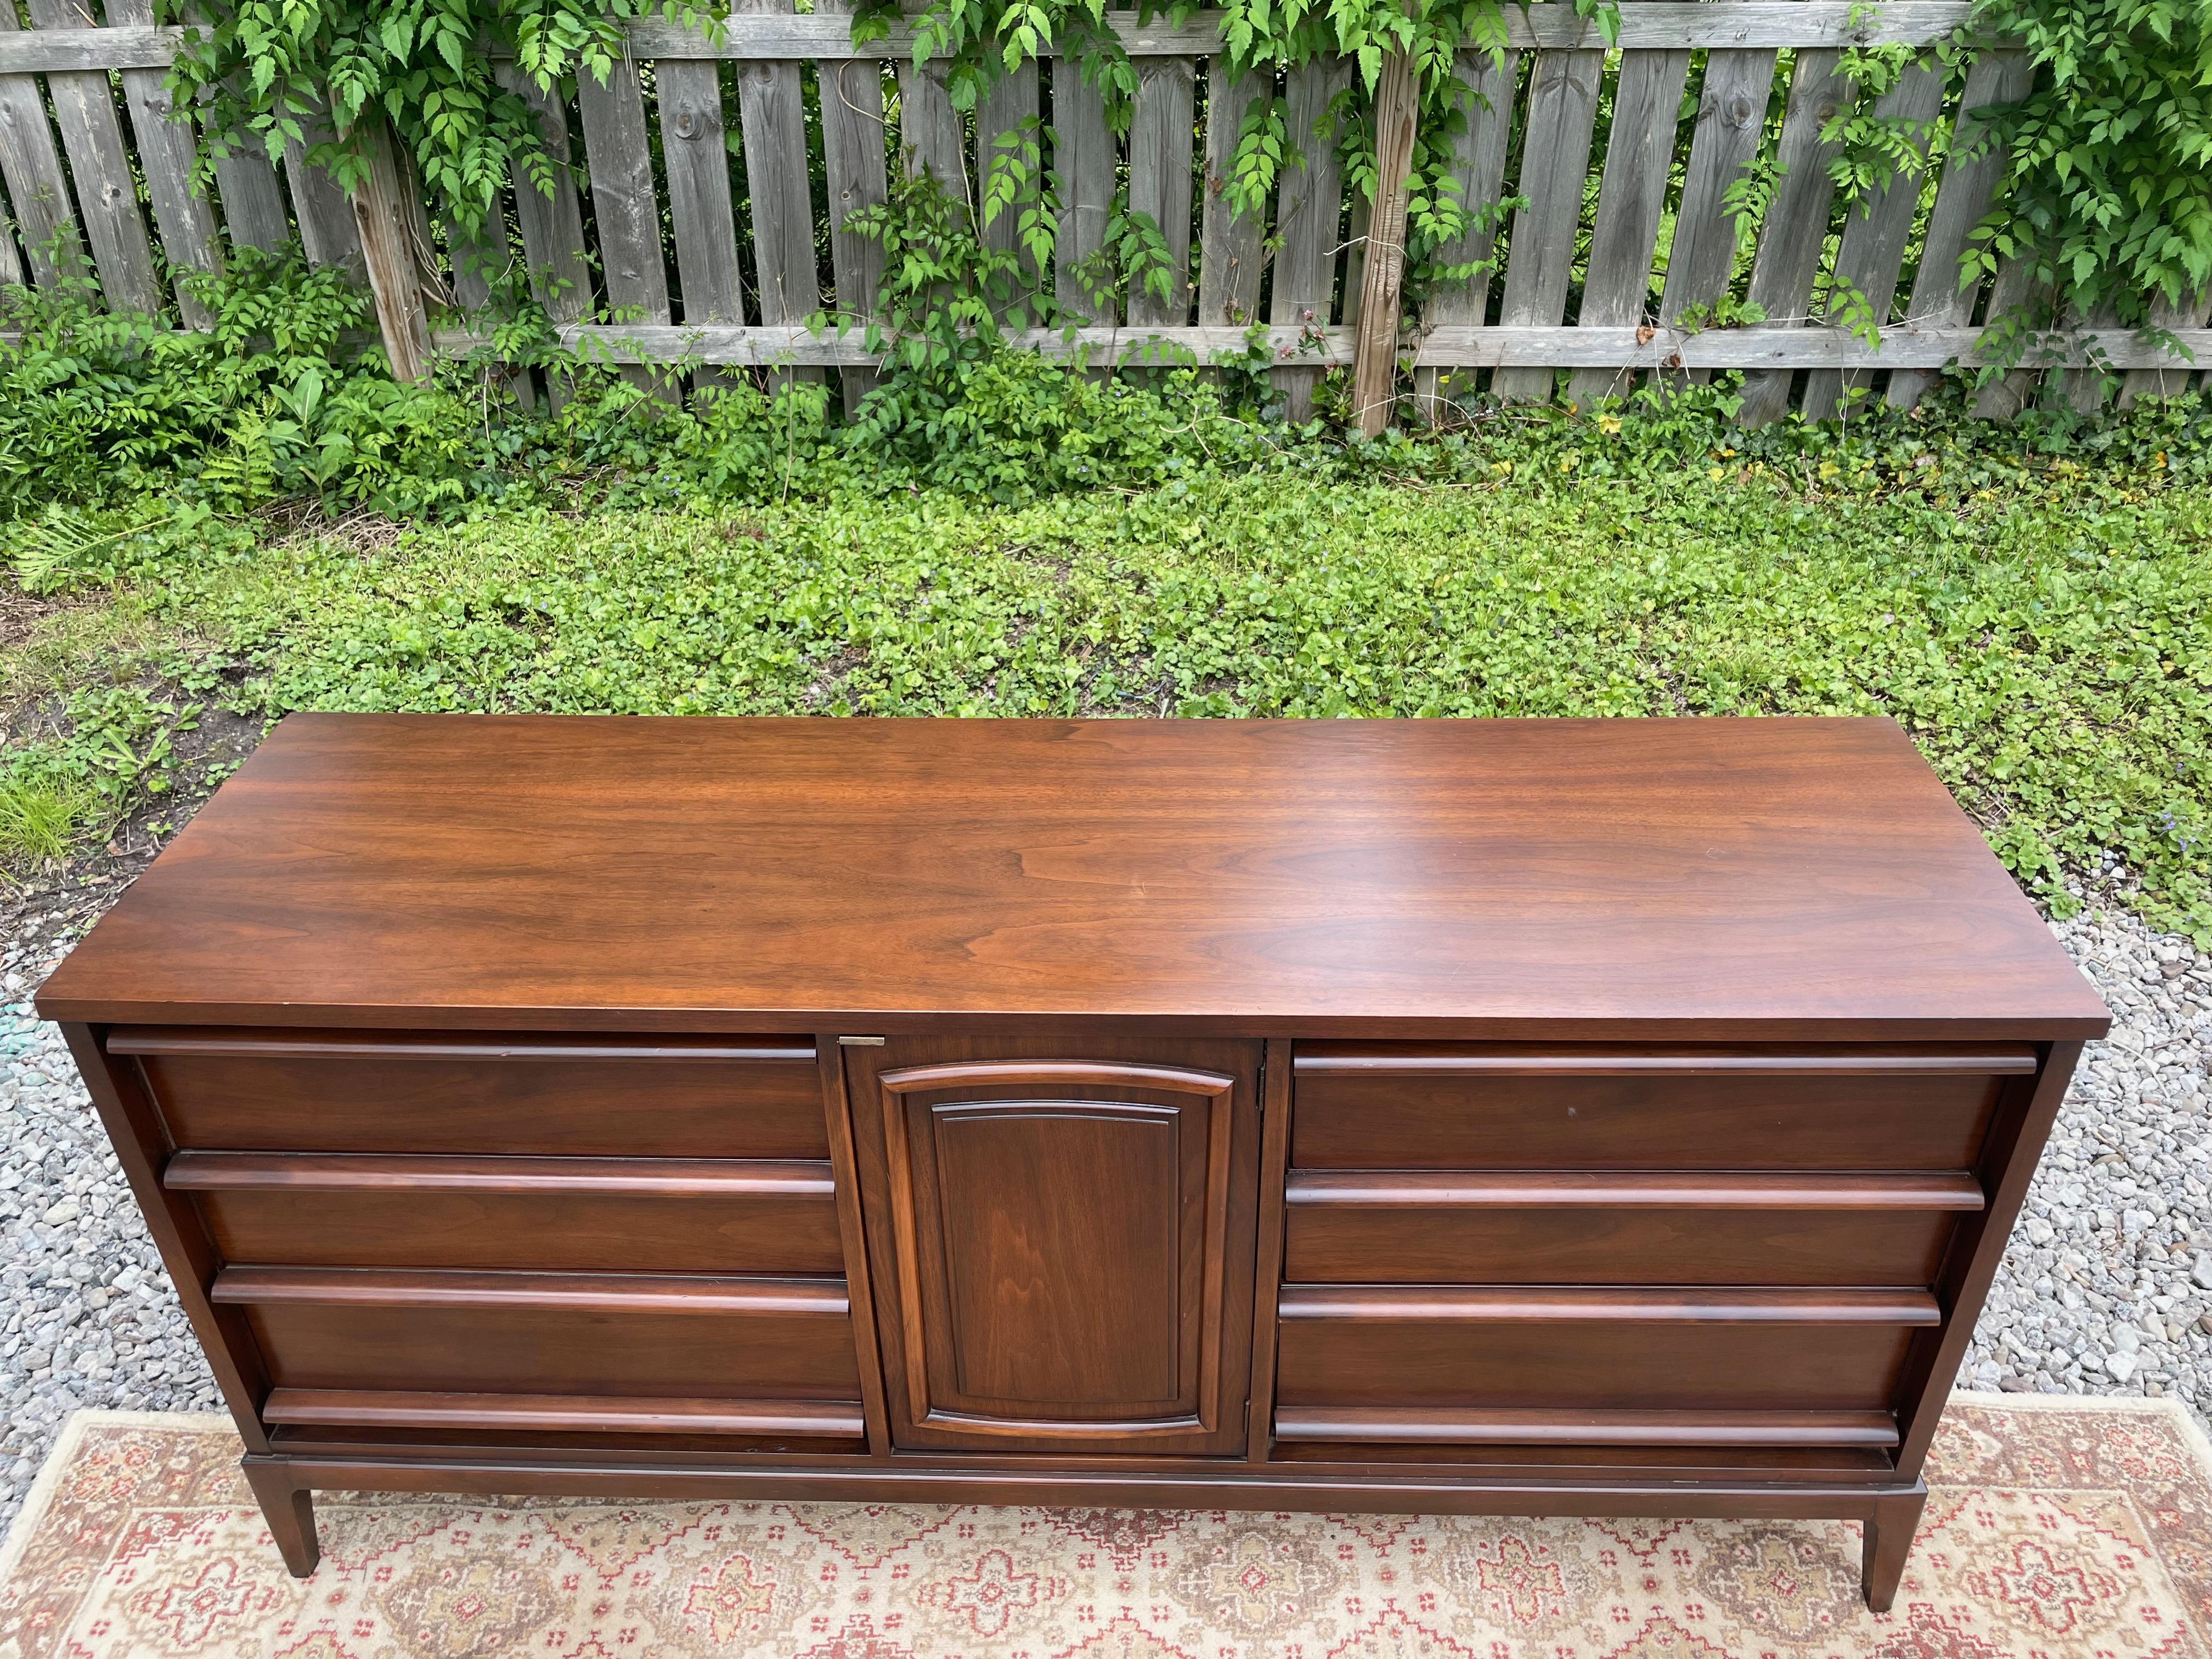 Beautifully refinished Mid-Century Modern walnut dresser with 8 large drawers and 3 small drawers in the middle. Perfect as a dresser or even a credenza in your beautiful home!

Drawer measurements:

Left and right drawers:
22